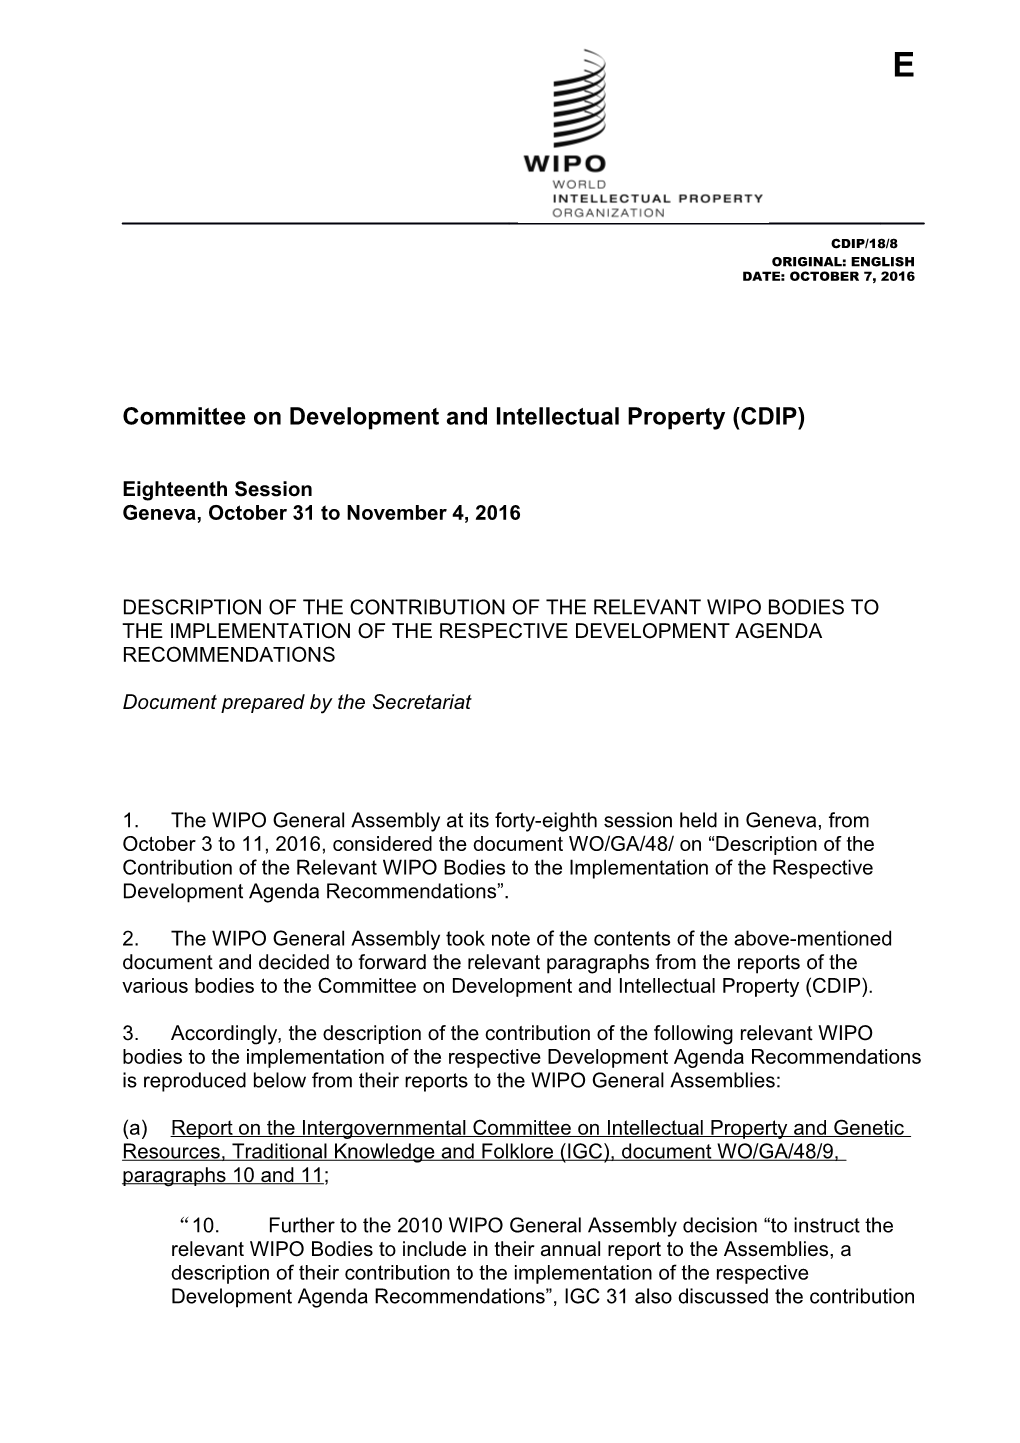 Committee on Development and Intellectual Property (CDIP) s1